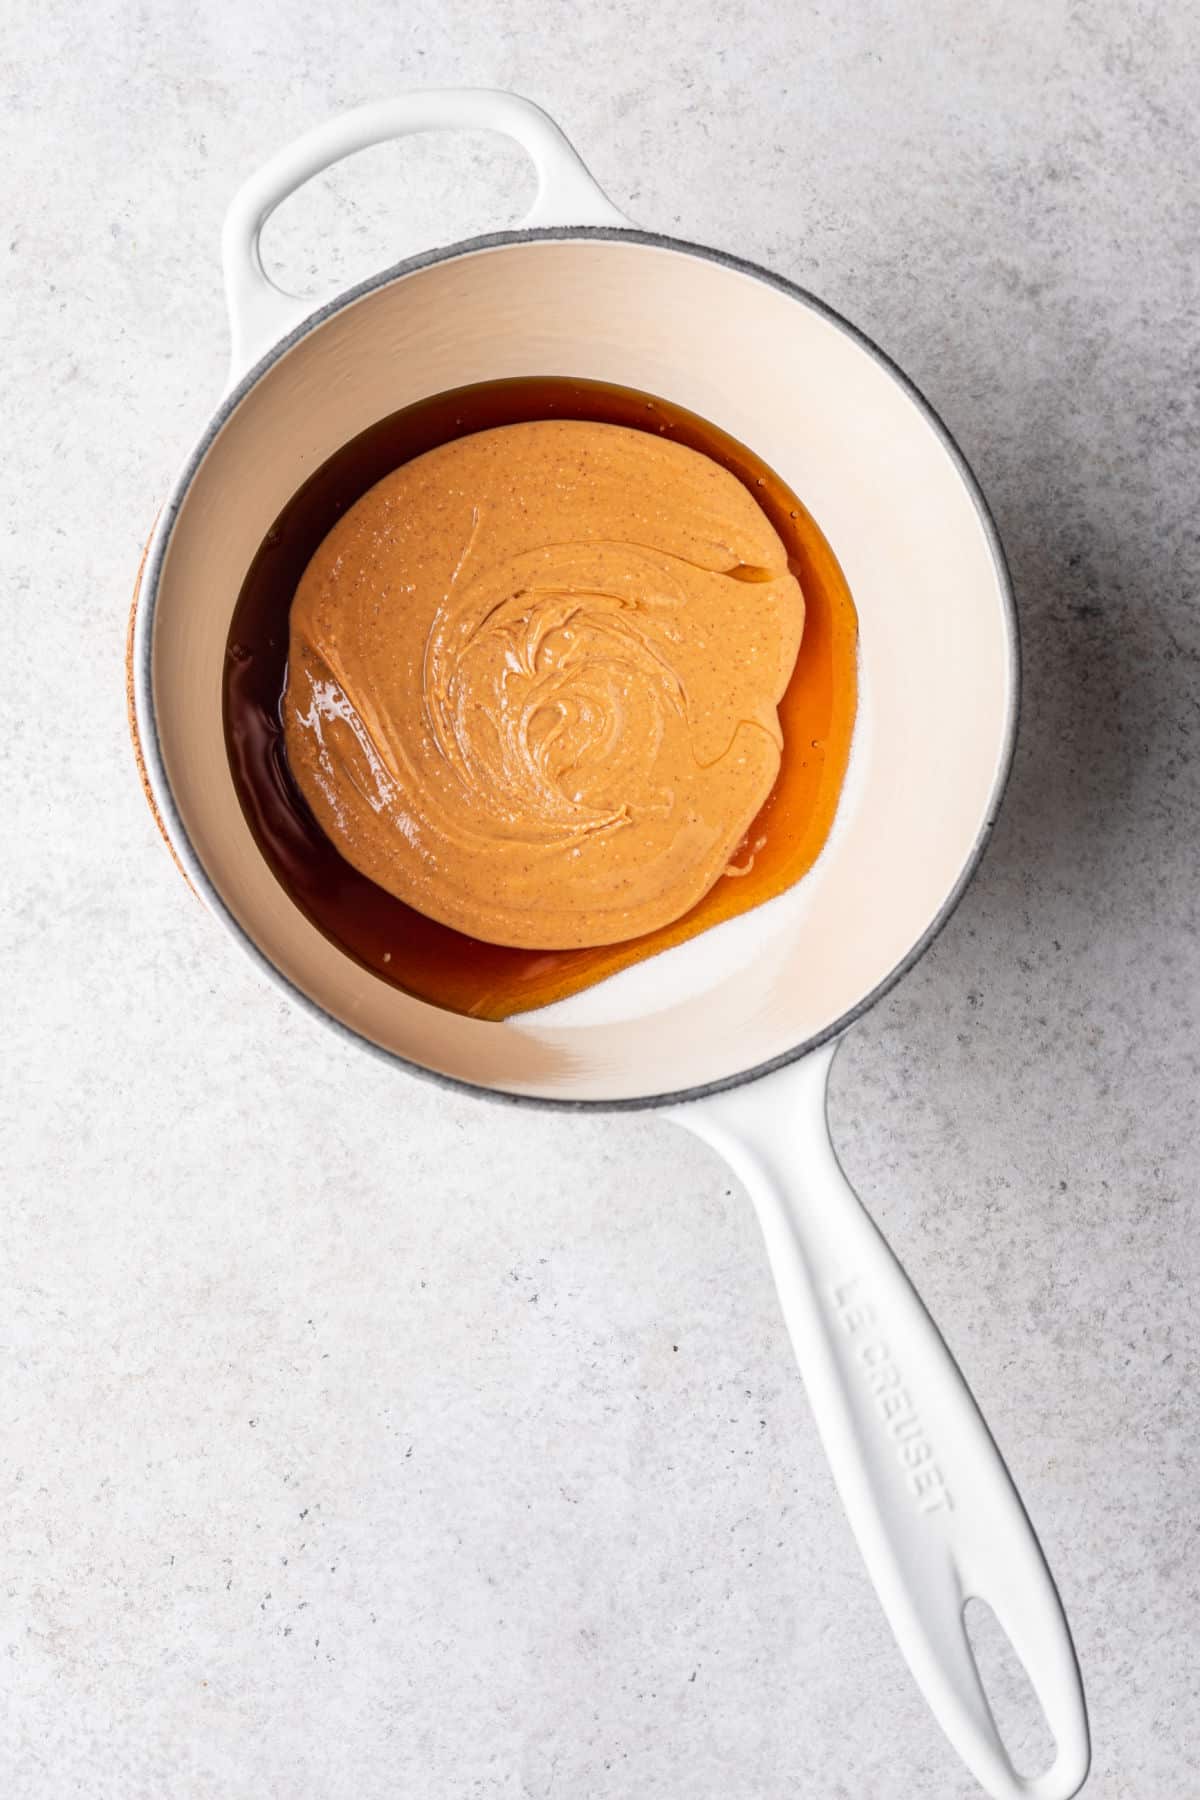 Peanut butter and honey in a saucepan.